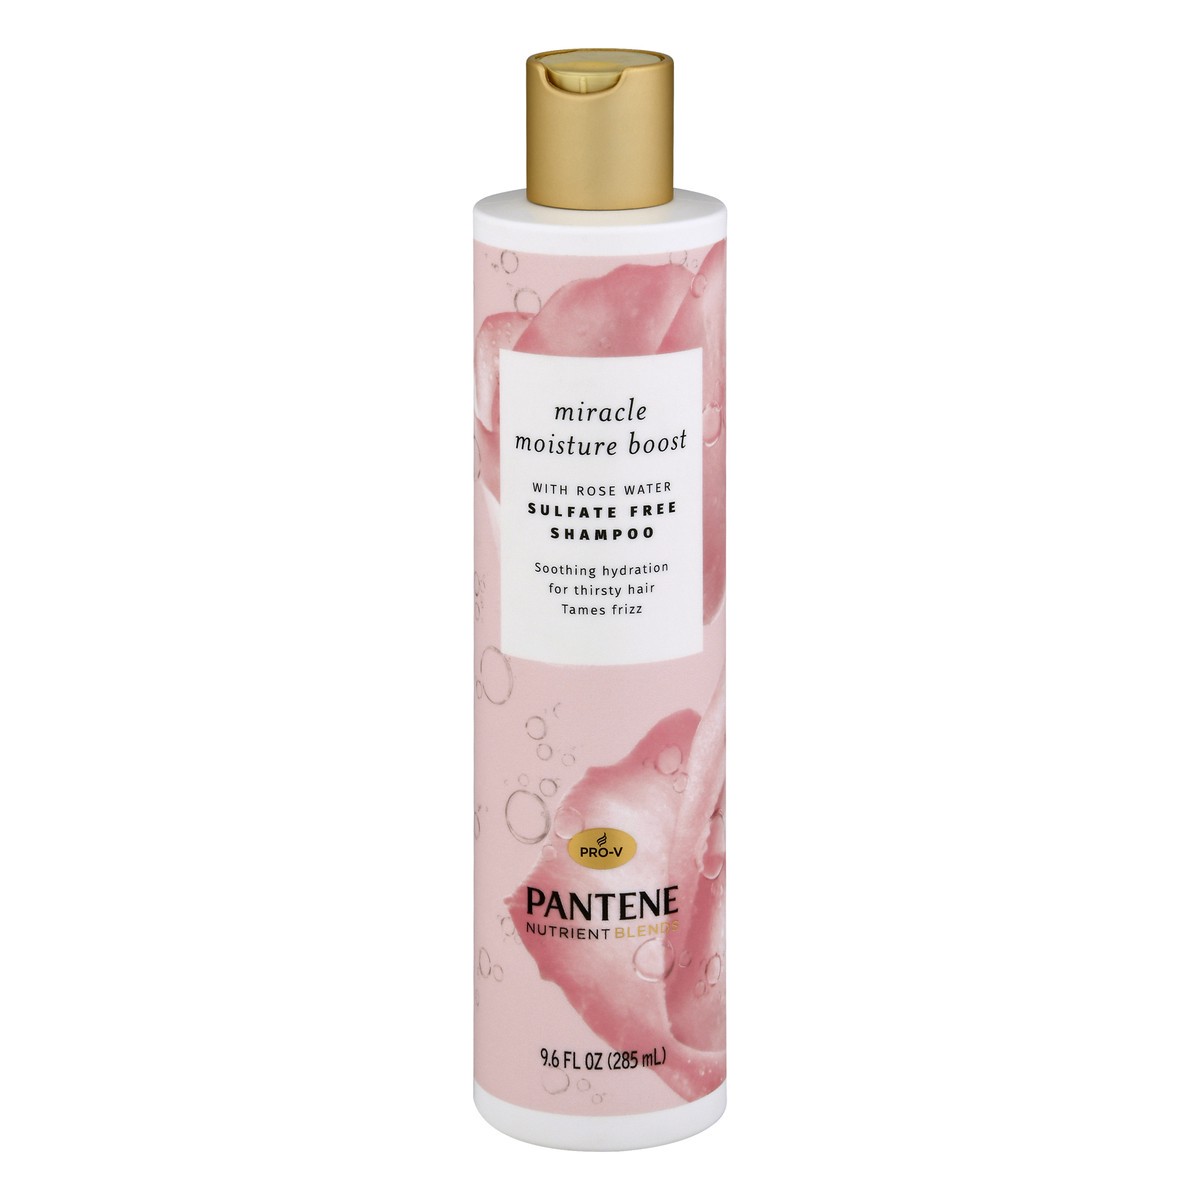 slide 1 of 1, Pantene Pro-V Nutrient Blends Miracle Moisture Boost with Rose Water Sulfate Free Miracle Moisture Boost Shampoo 9.6 oz, 9.6 oz